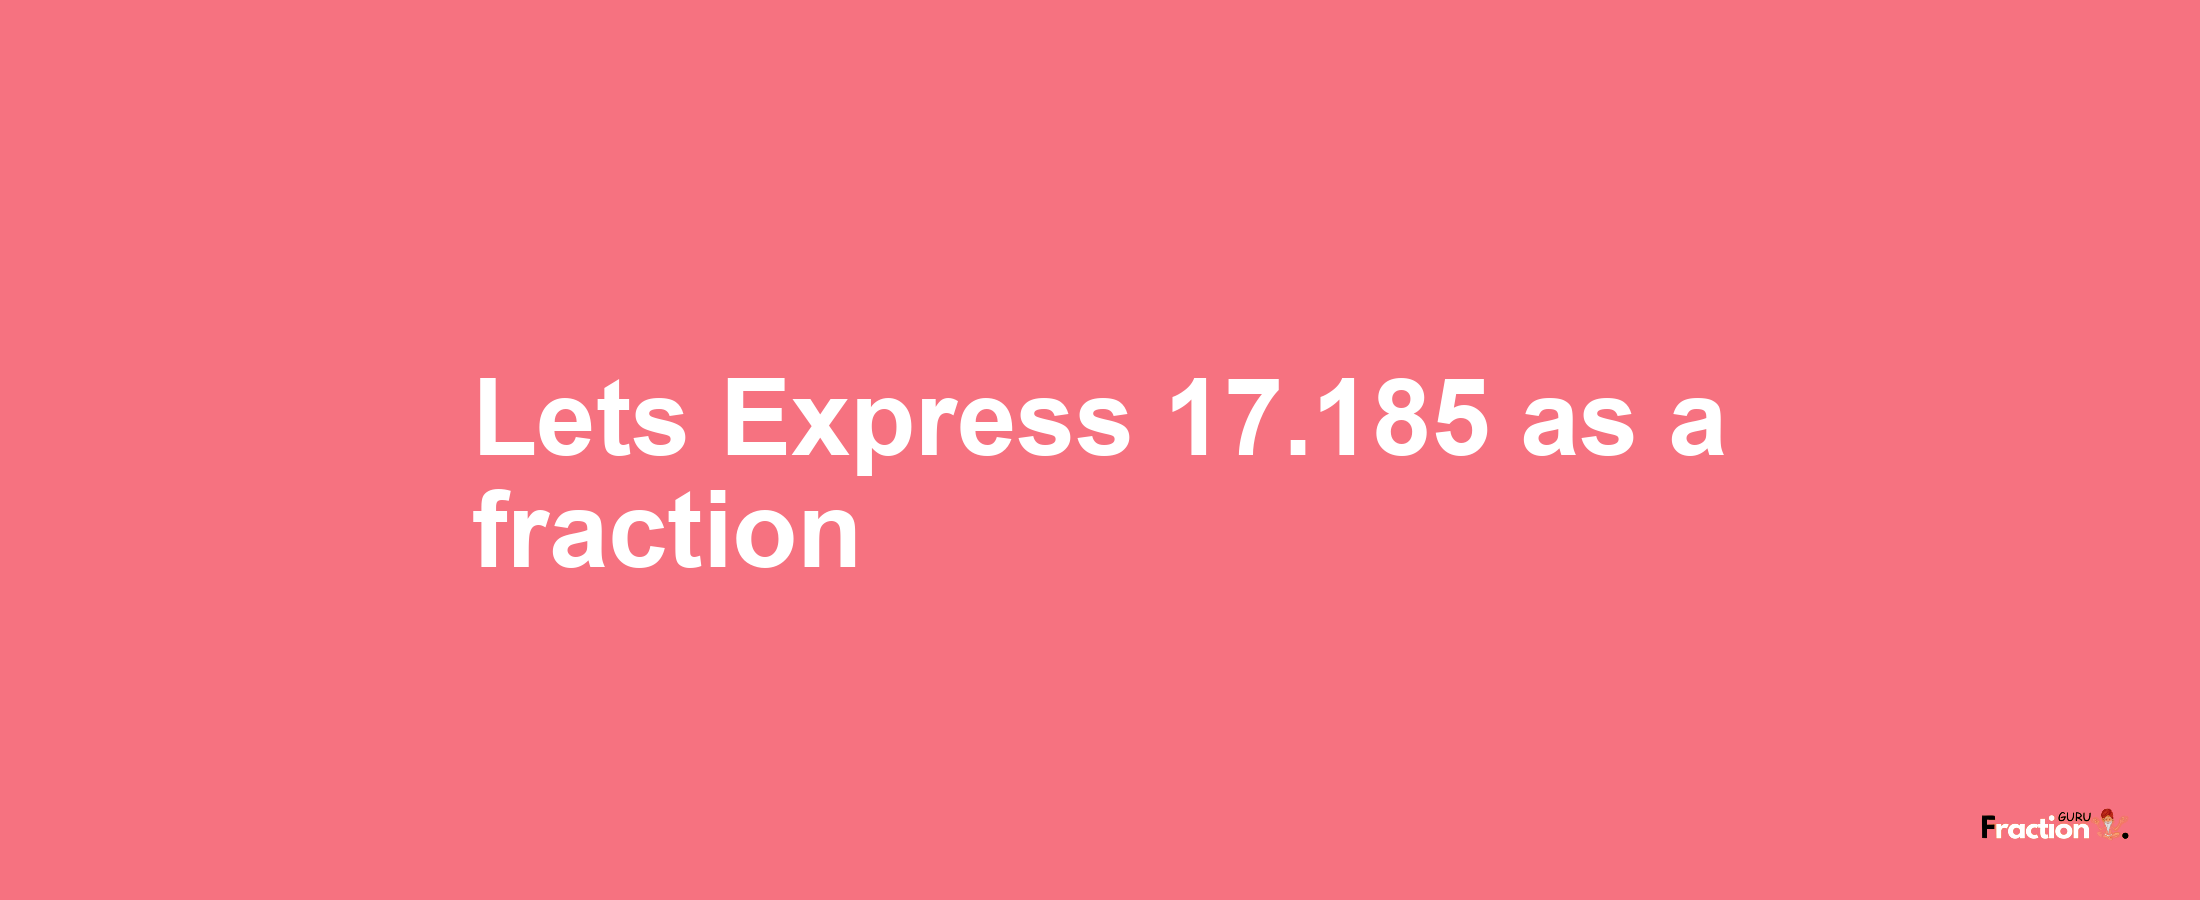 Lets Express 17.185 as afraction